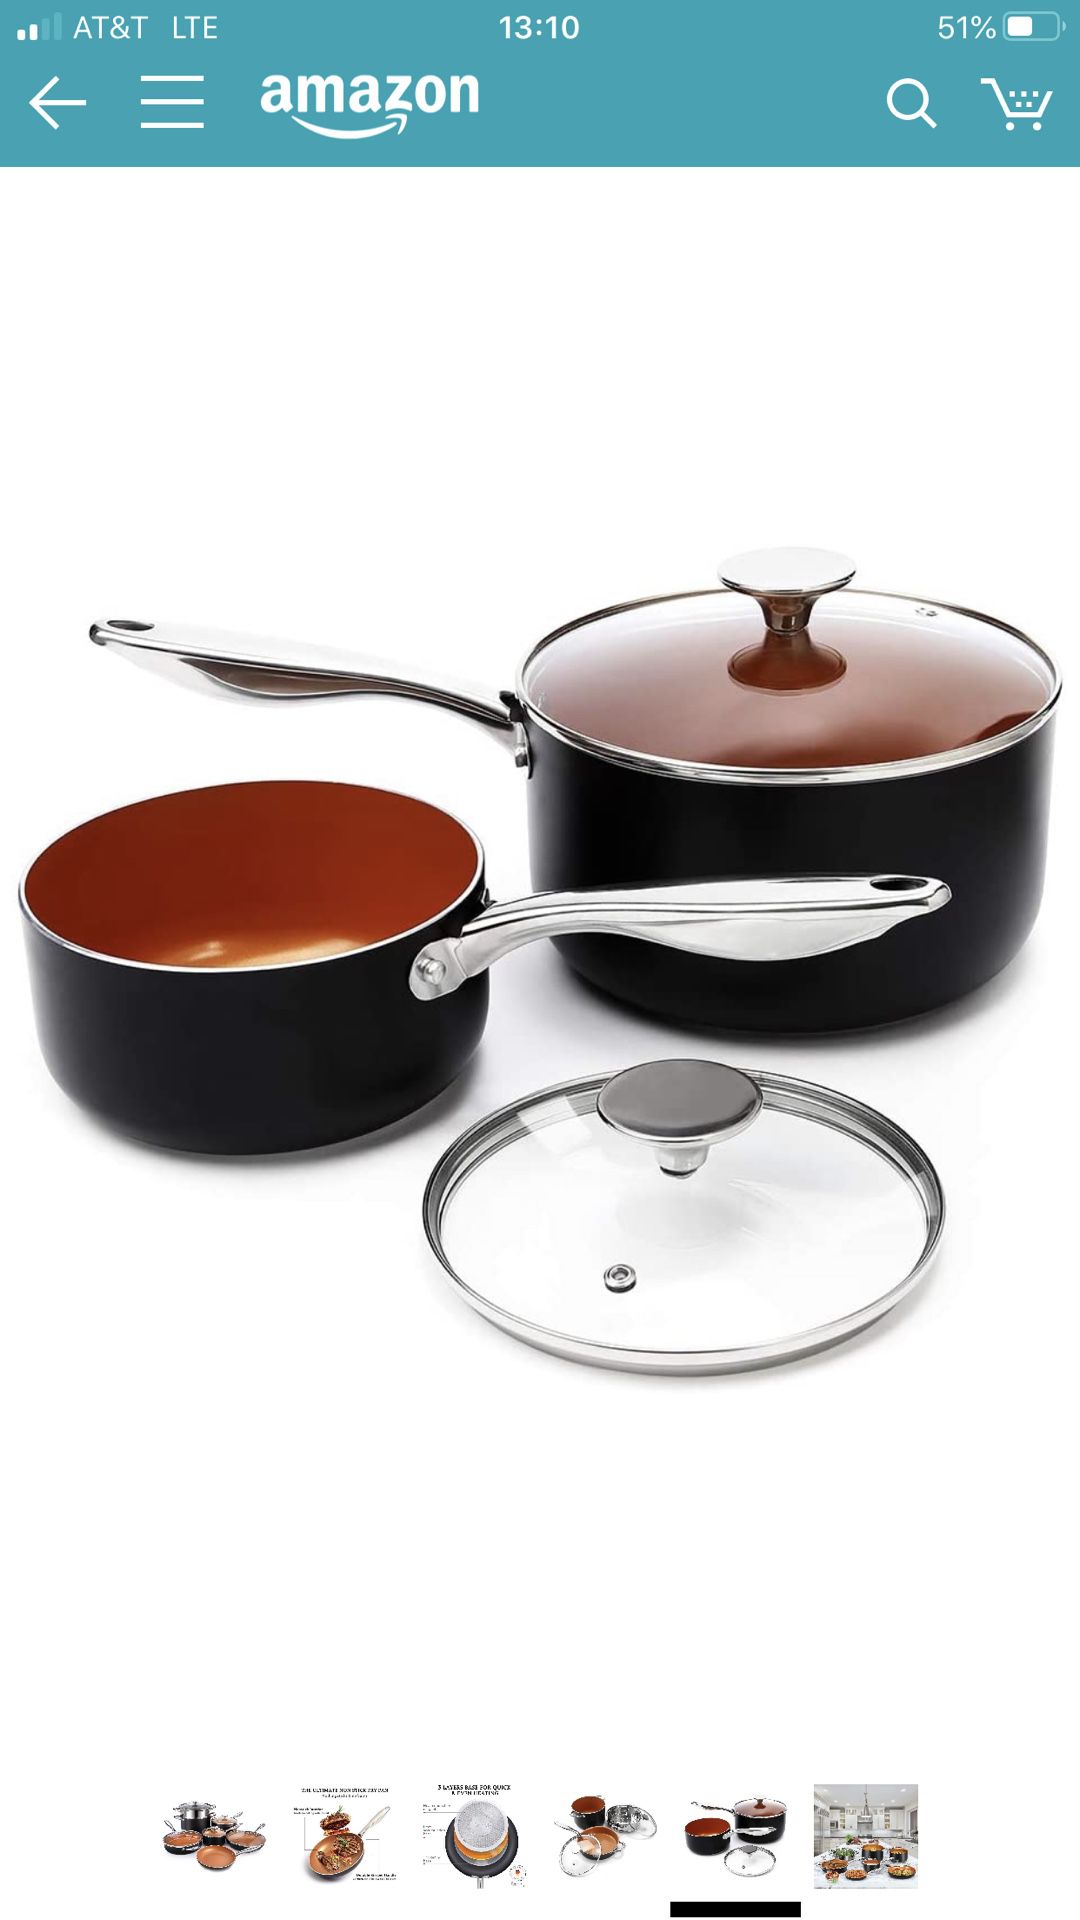 Up To 37% Off on MICHELANGELO Copper Cookware